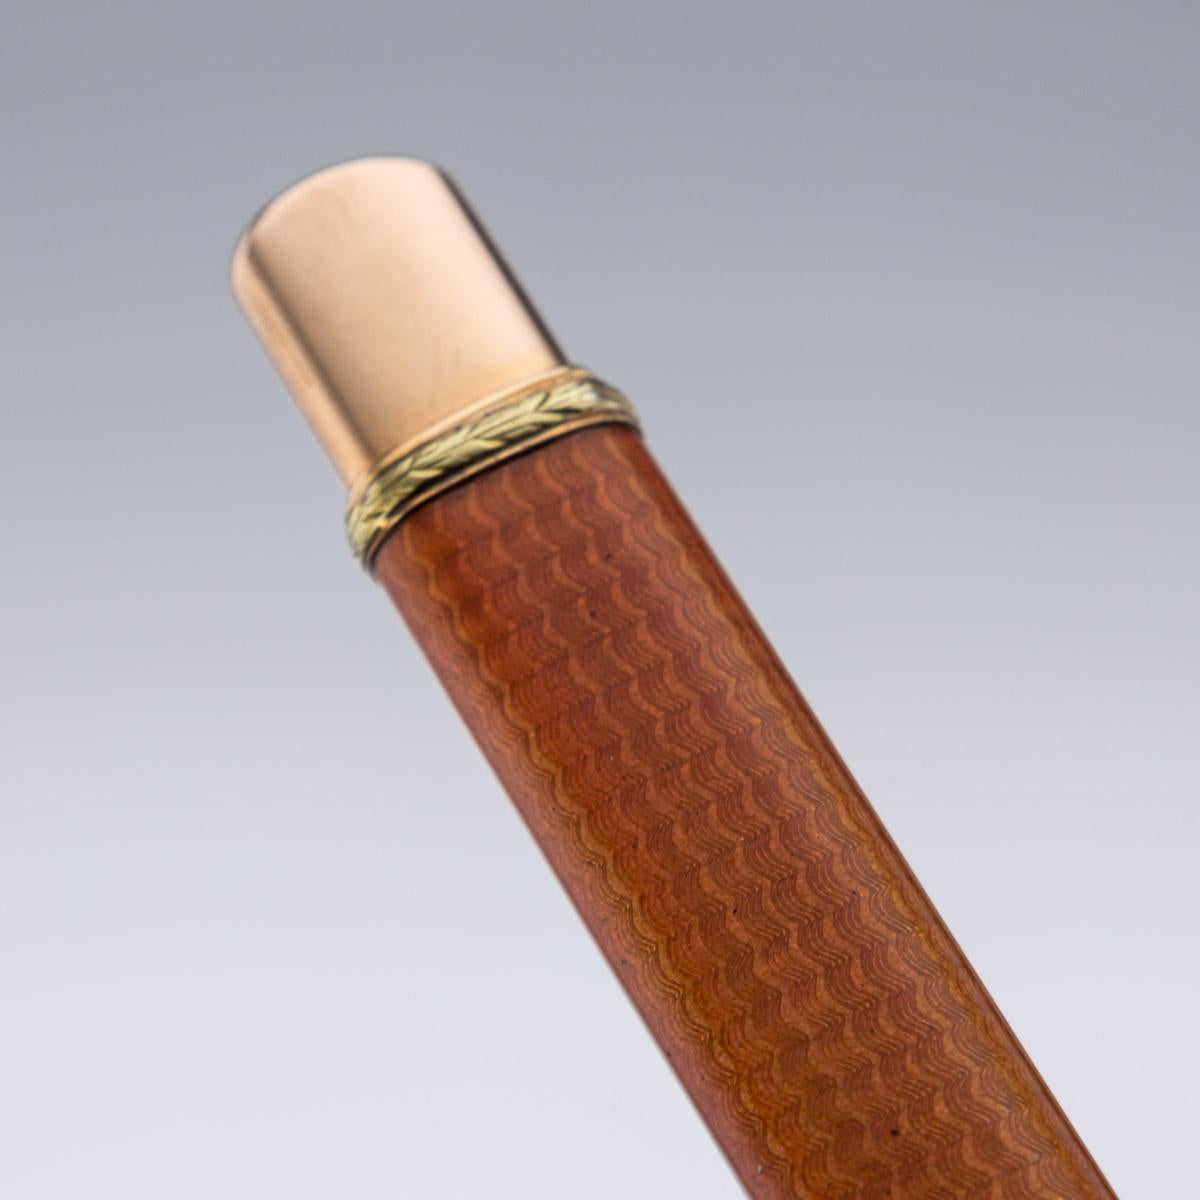 20th Century Russian Faberge Two-Colour Gold-Mounted Enamel Pencil, Adler c.1910 4